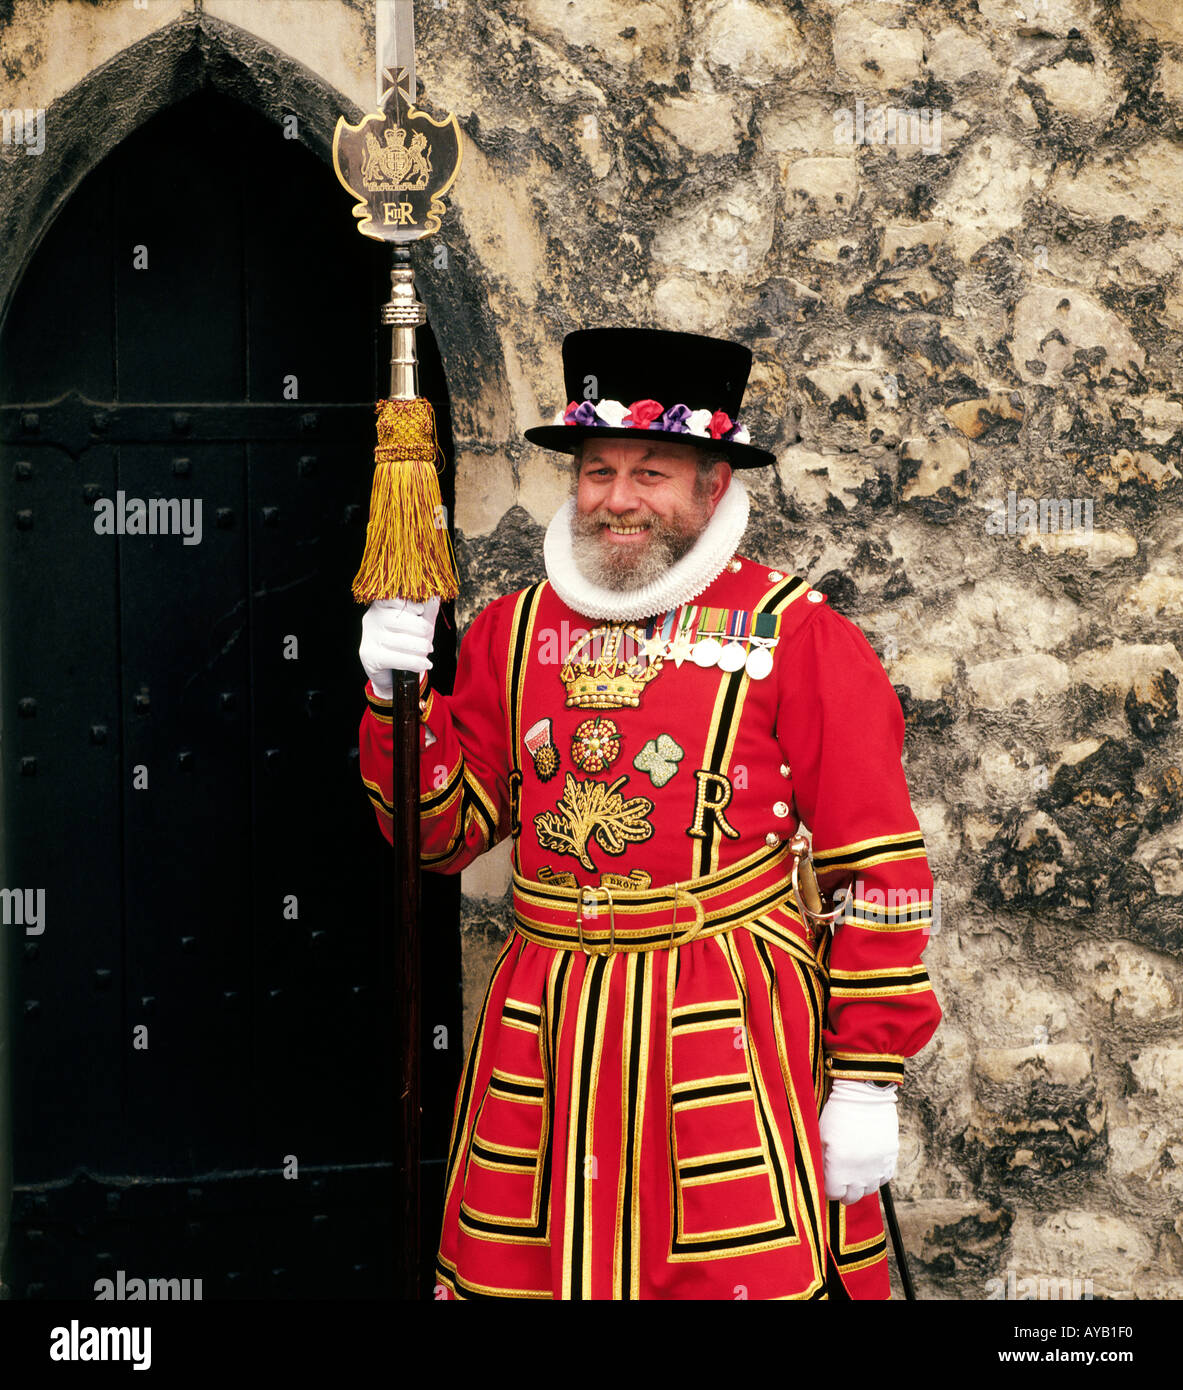 Yeoman Warder Beefeater at the Tower of London Stock Photo